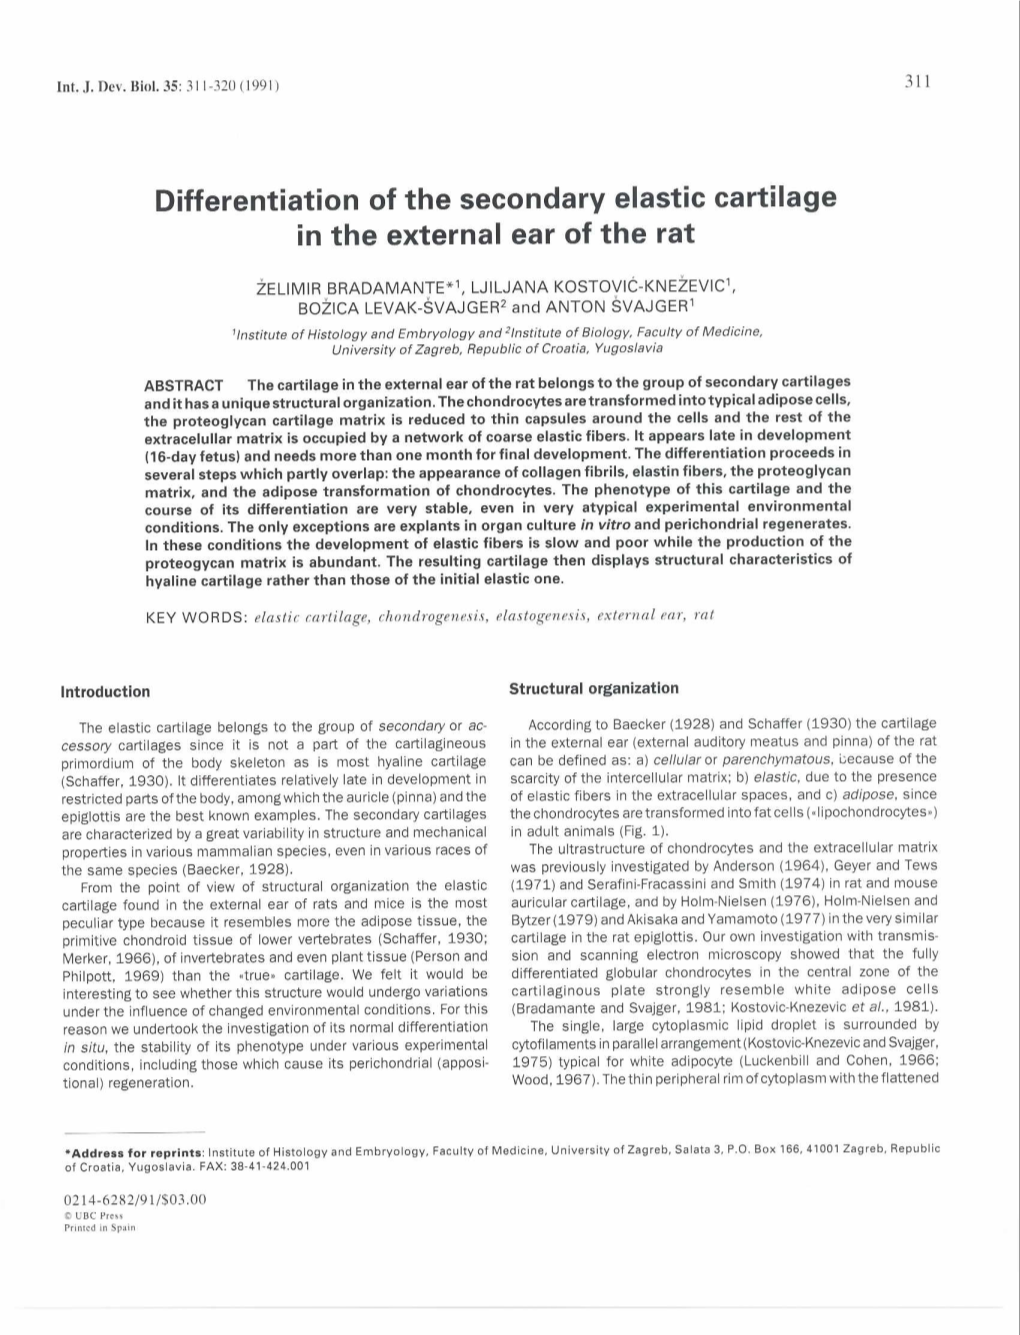 Differentiation of the Secondary Elastic Cartilage in the External Ear of the Rat